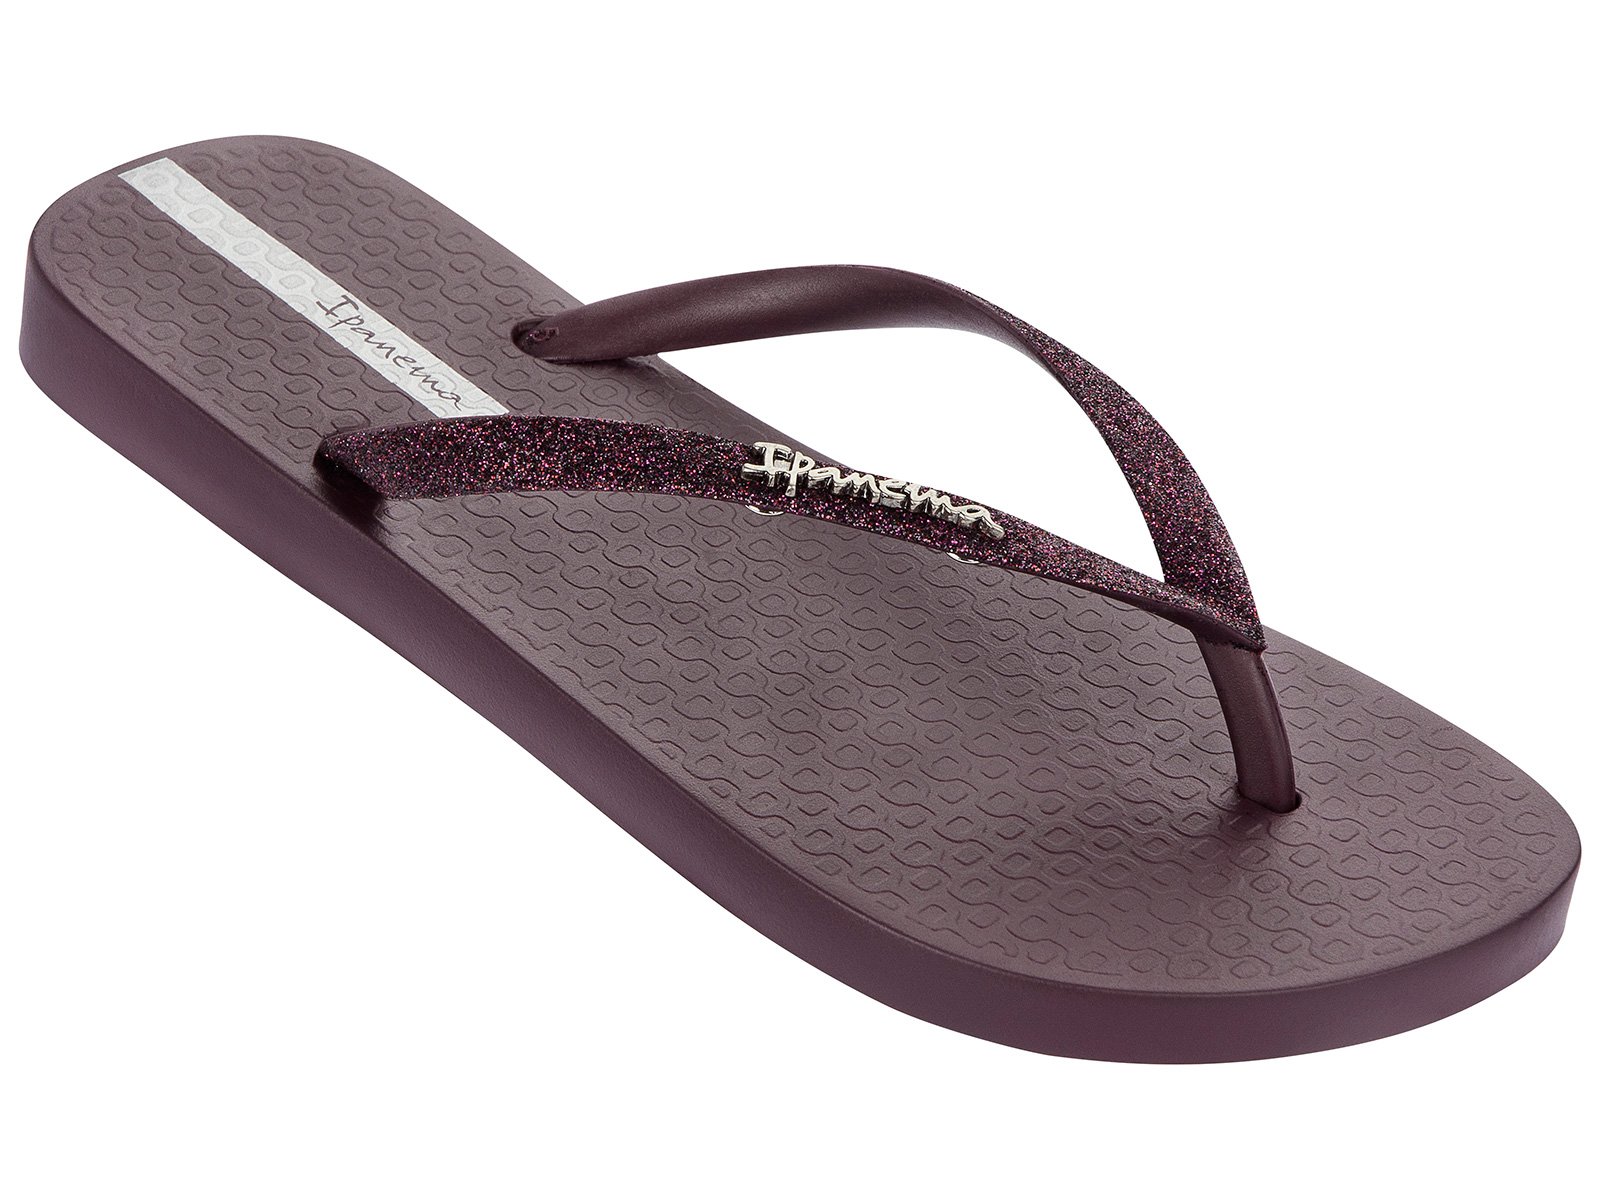 ipanema flip flops with bow